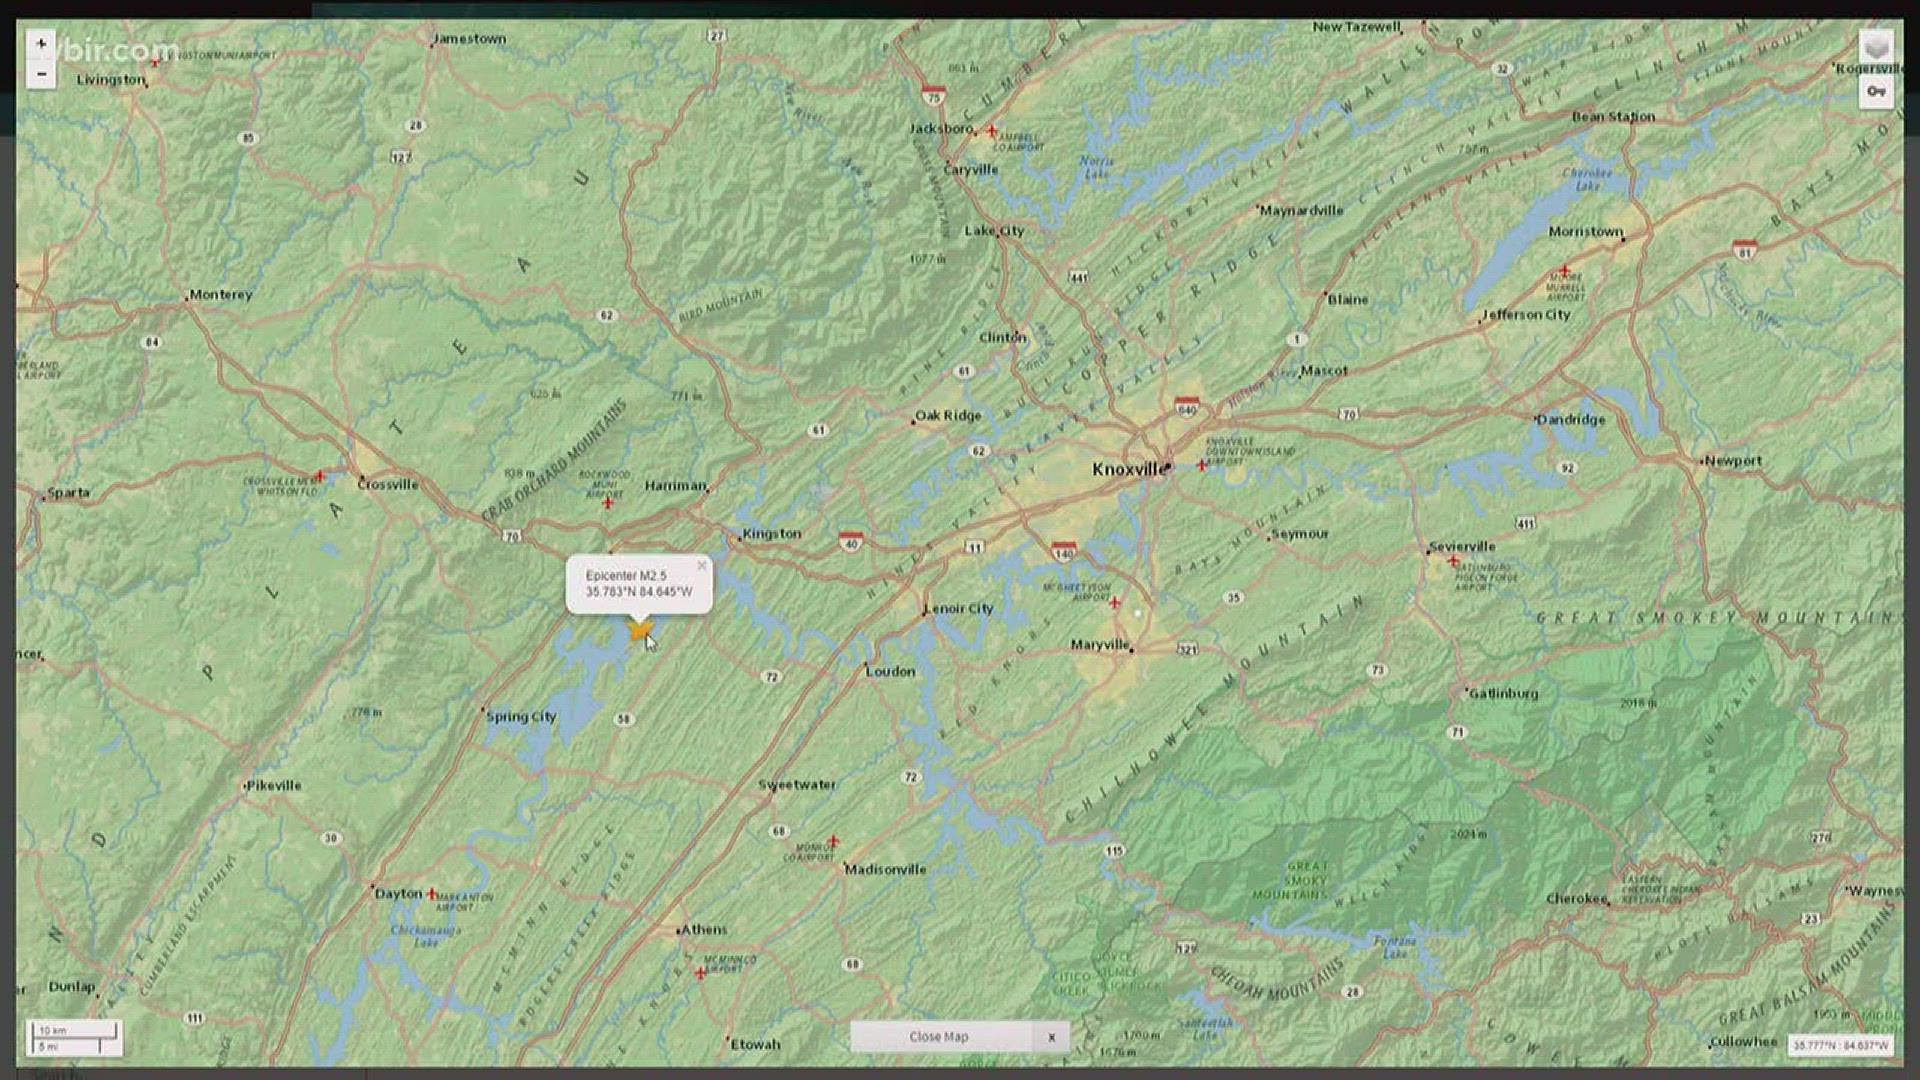 The 2.5 magnitude quake was reported before 7:00 a.m. Sunday near Rockwood.